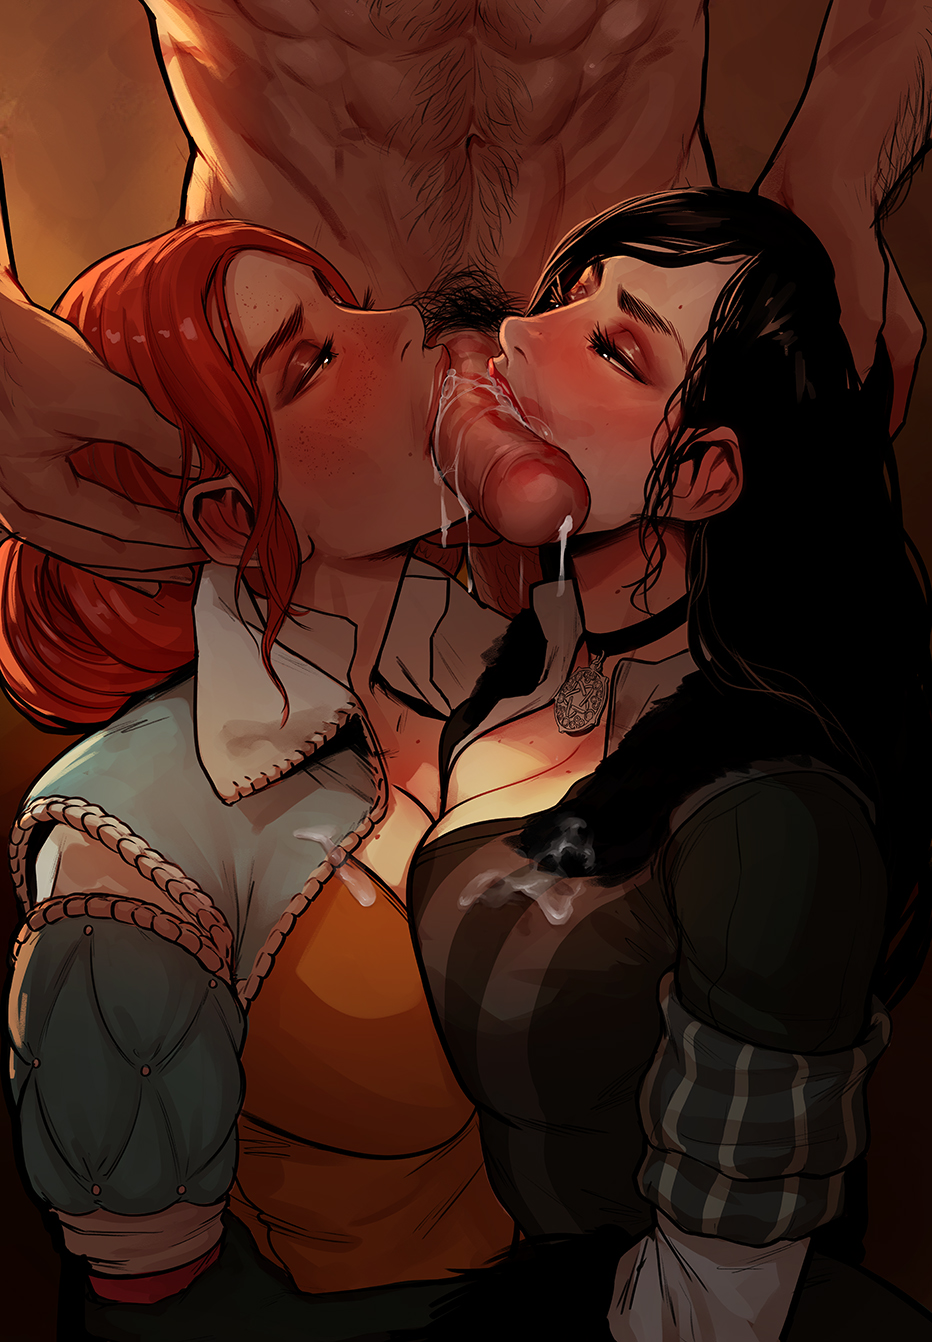 Cherry-Gig-Triss-and-Yennefer-blowjob-the-witcher-porn.jpeg